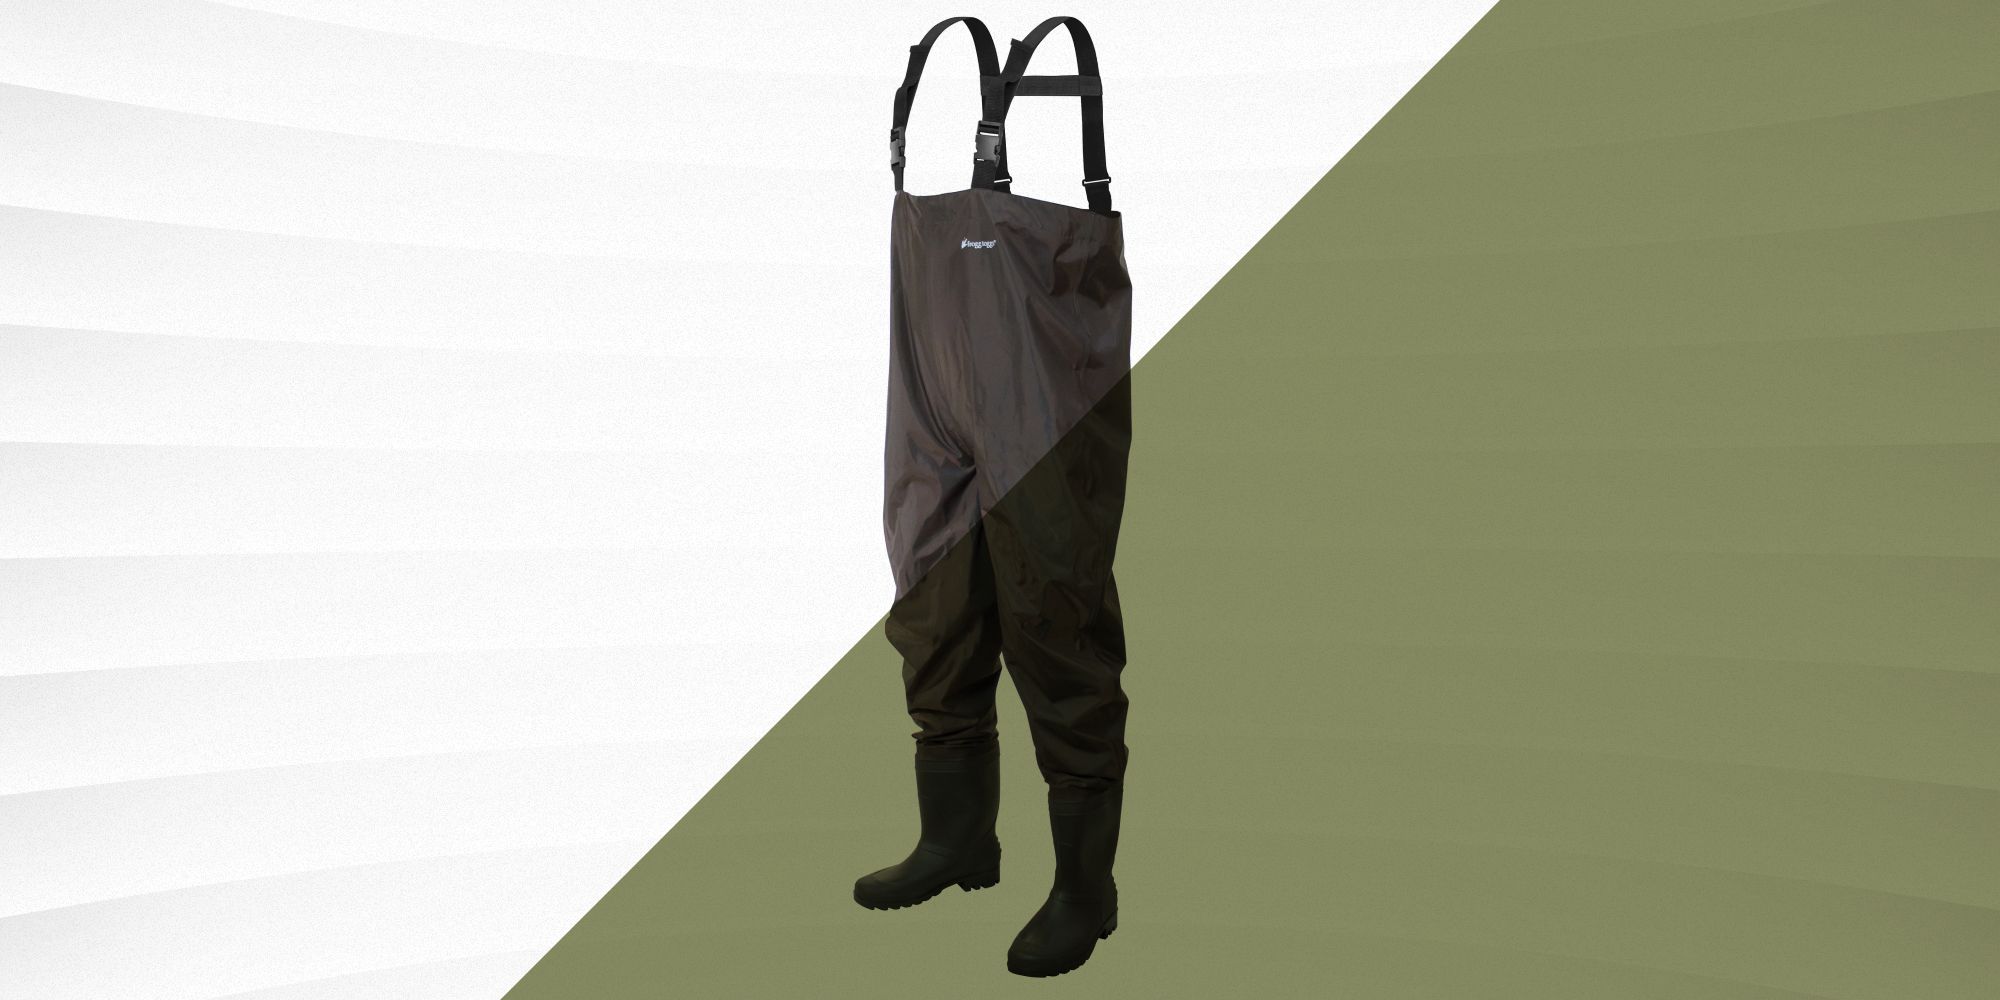 BELLE DURA Fishing Waders Waterproof Lightweight with Boots Nylon Pants PVC Boots Chest Waders for Men Women